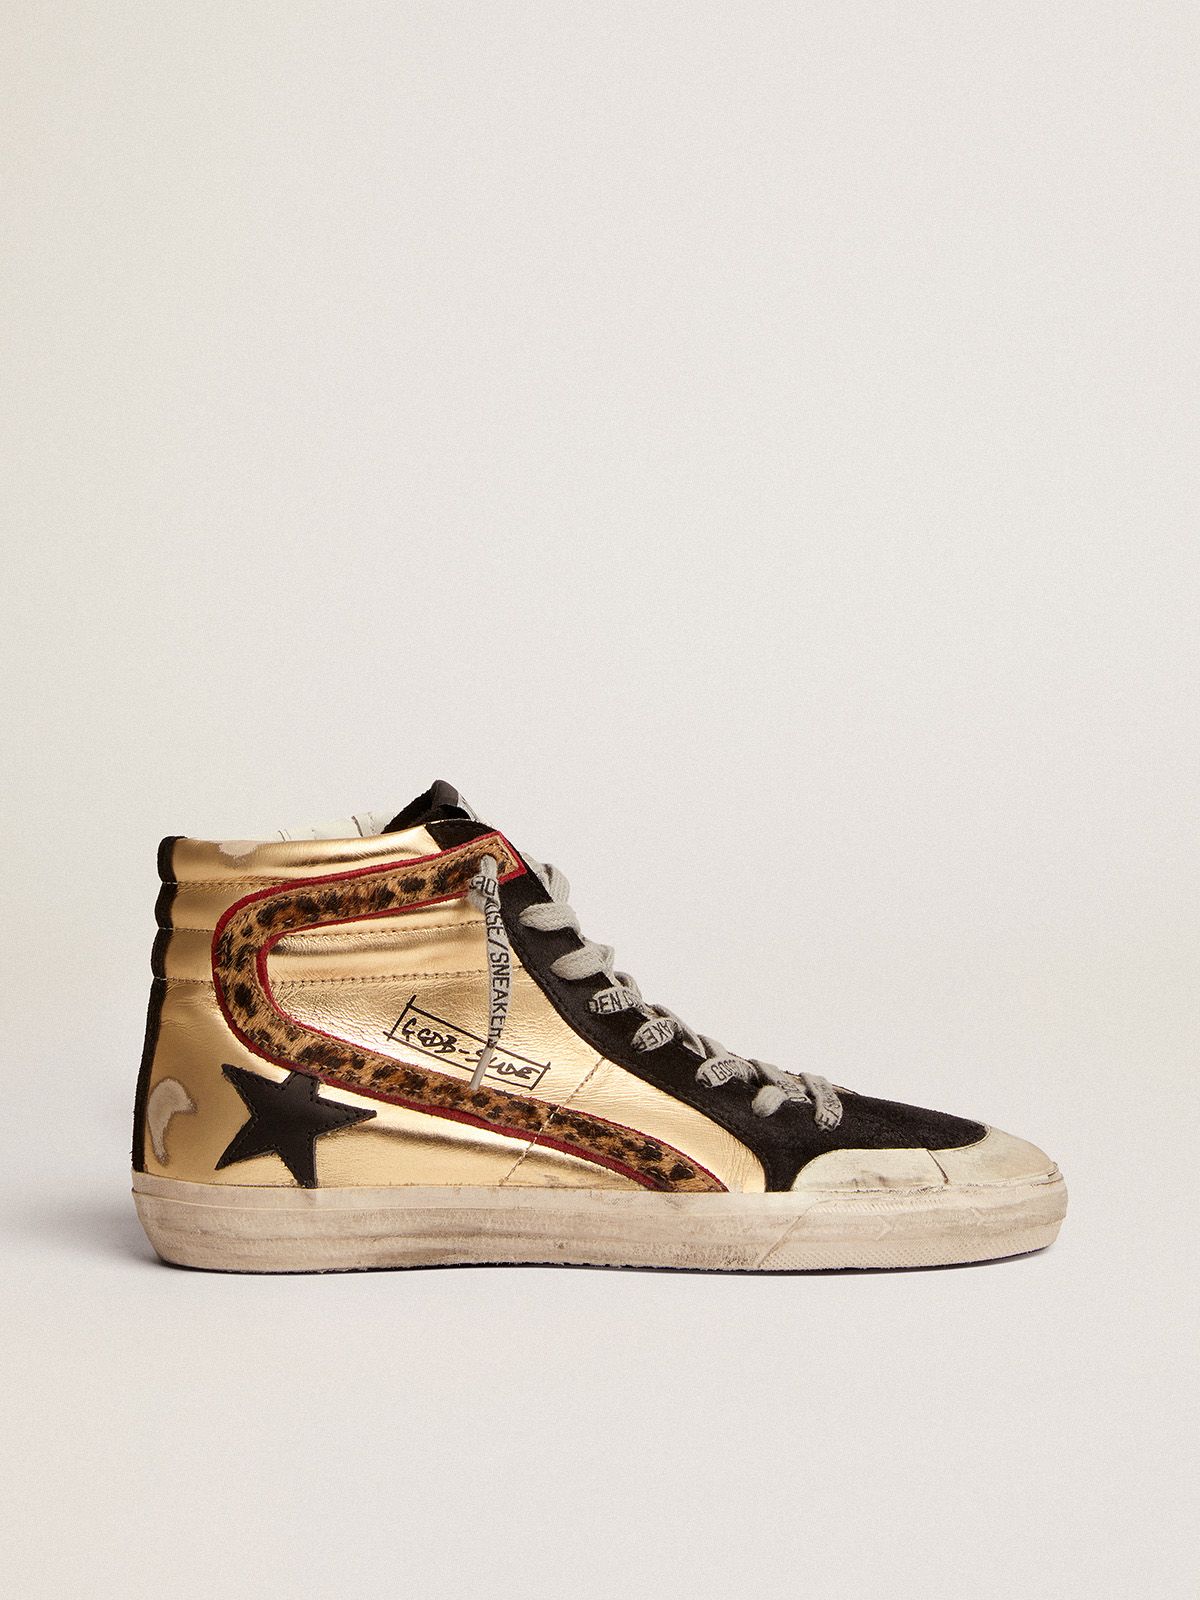 golden goose with leopard-print leather Penstar and star gold insert Slide pony sneakers in skin black